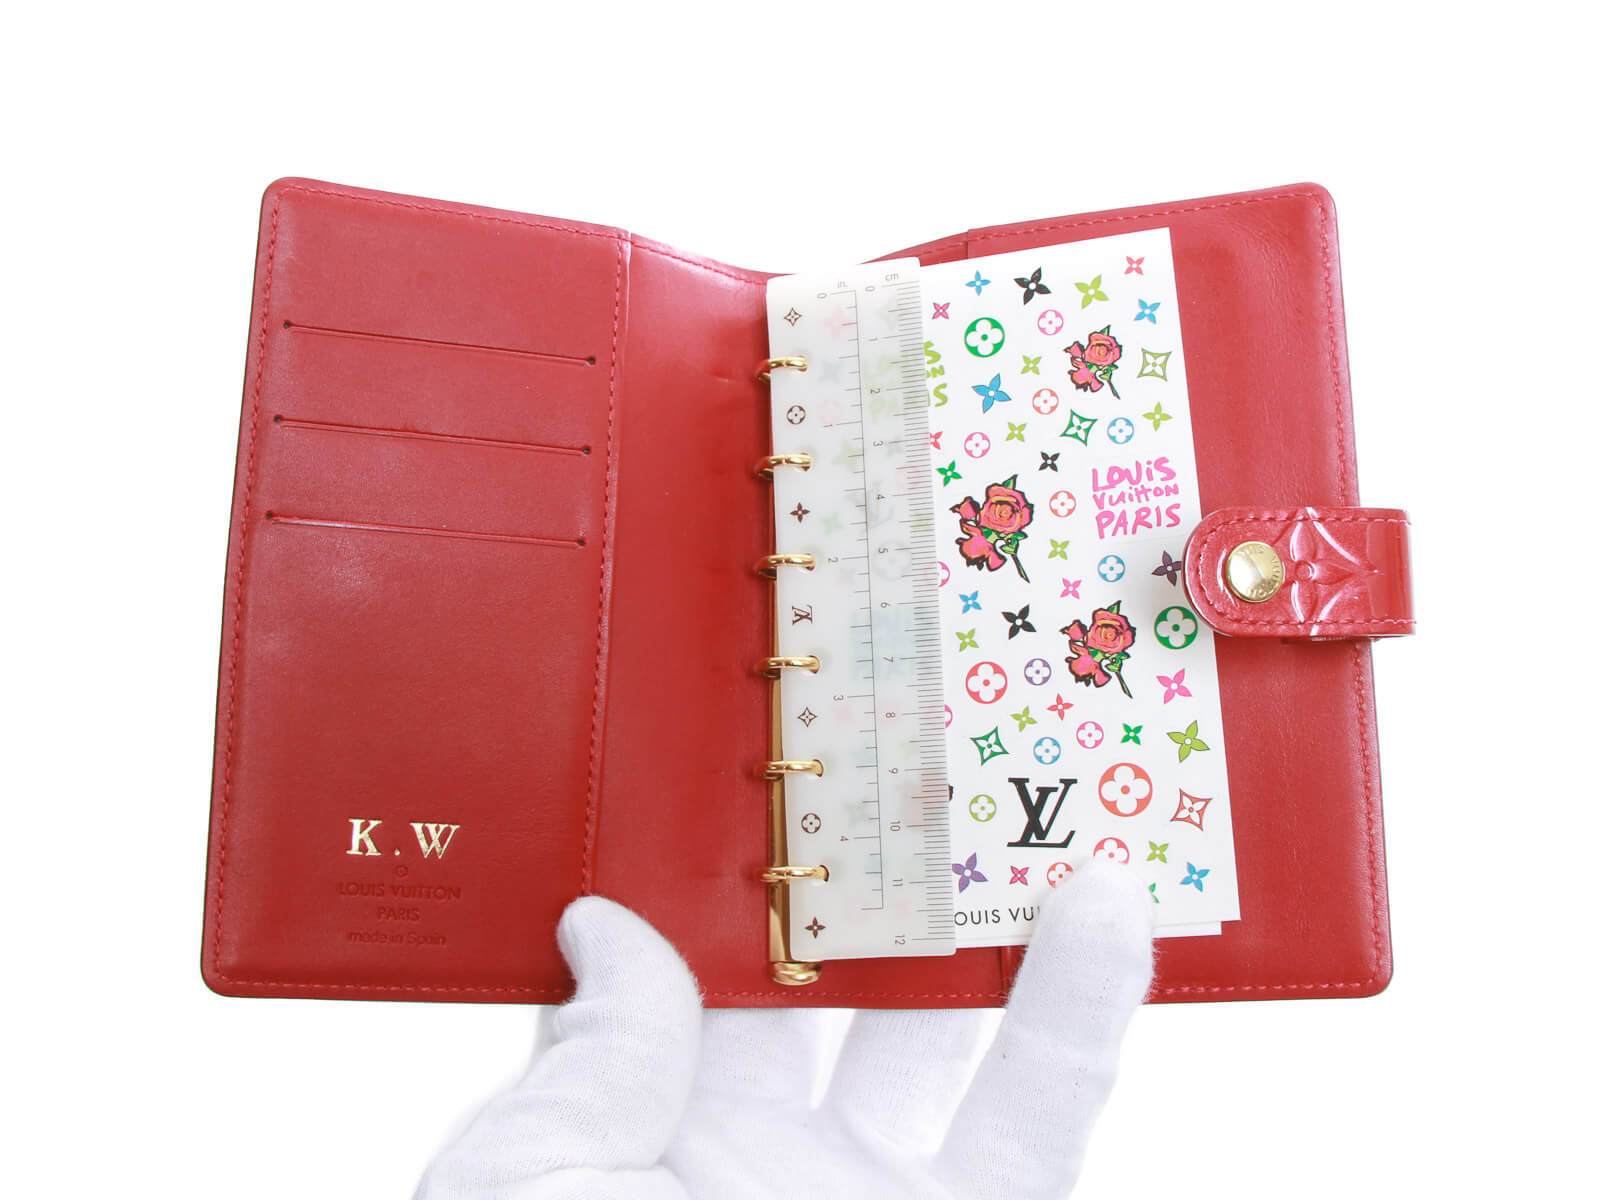 Authentic Louis Vuitton Vernis Agenda PM R21016 Day Planner Red